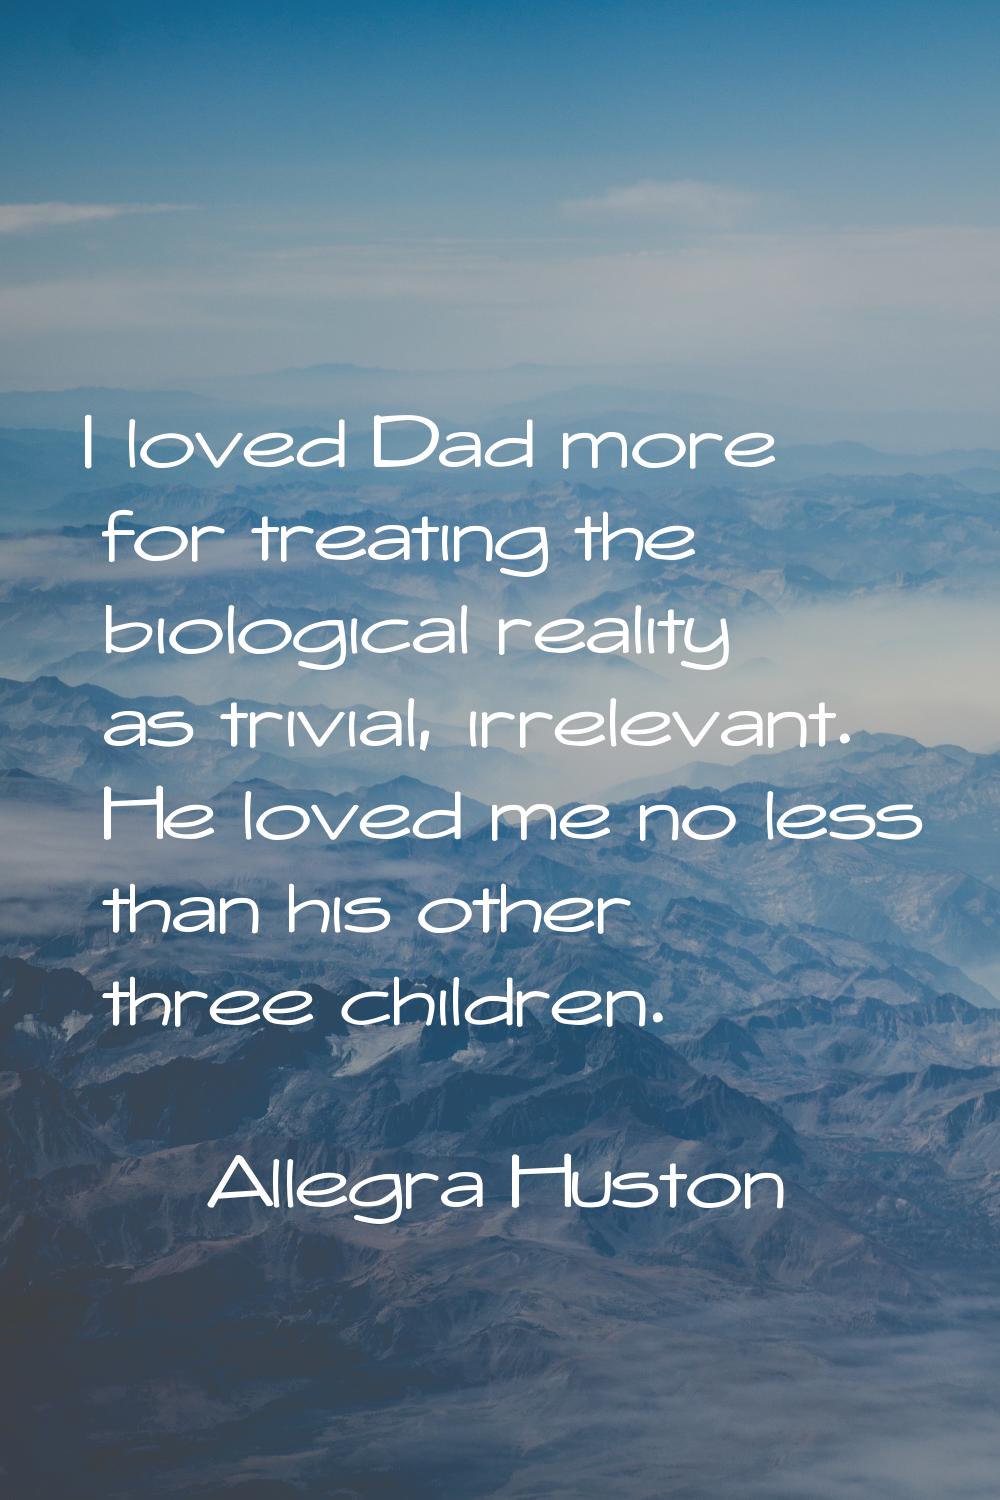 I loved Dad more for treating the biological reality as trivial, irrelevant. He loved me no less th